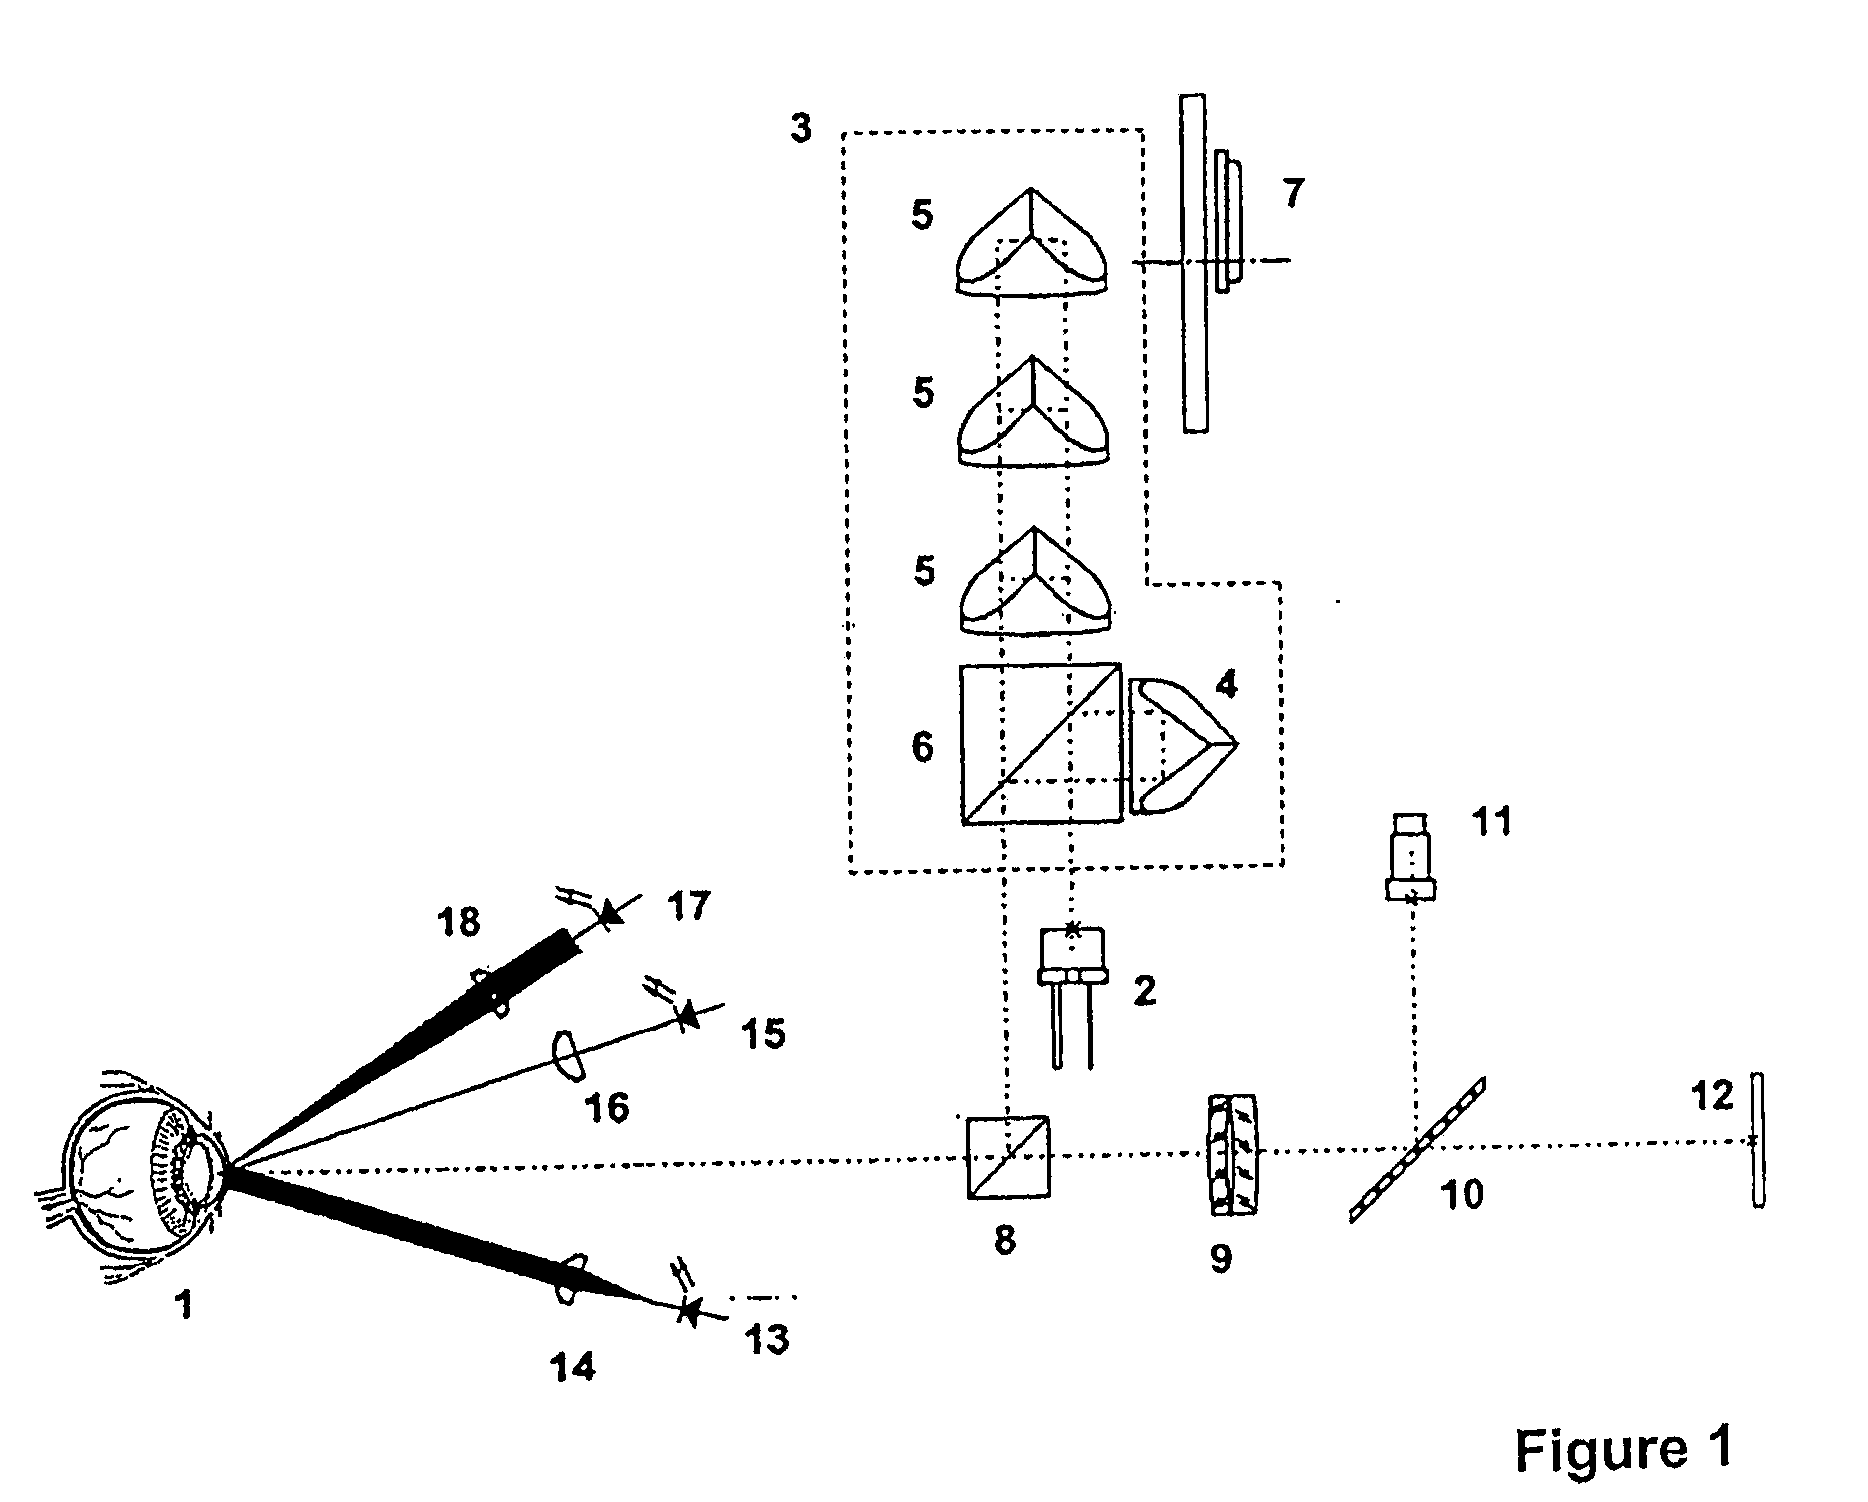 Device and Method for Axial Length Measurement Having Expanded Measuring Function in the Anterior Eye Segment